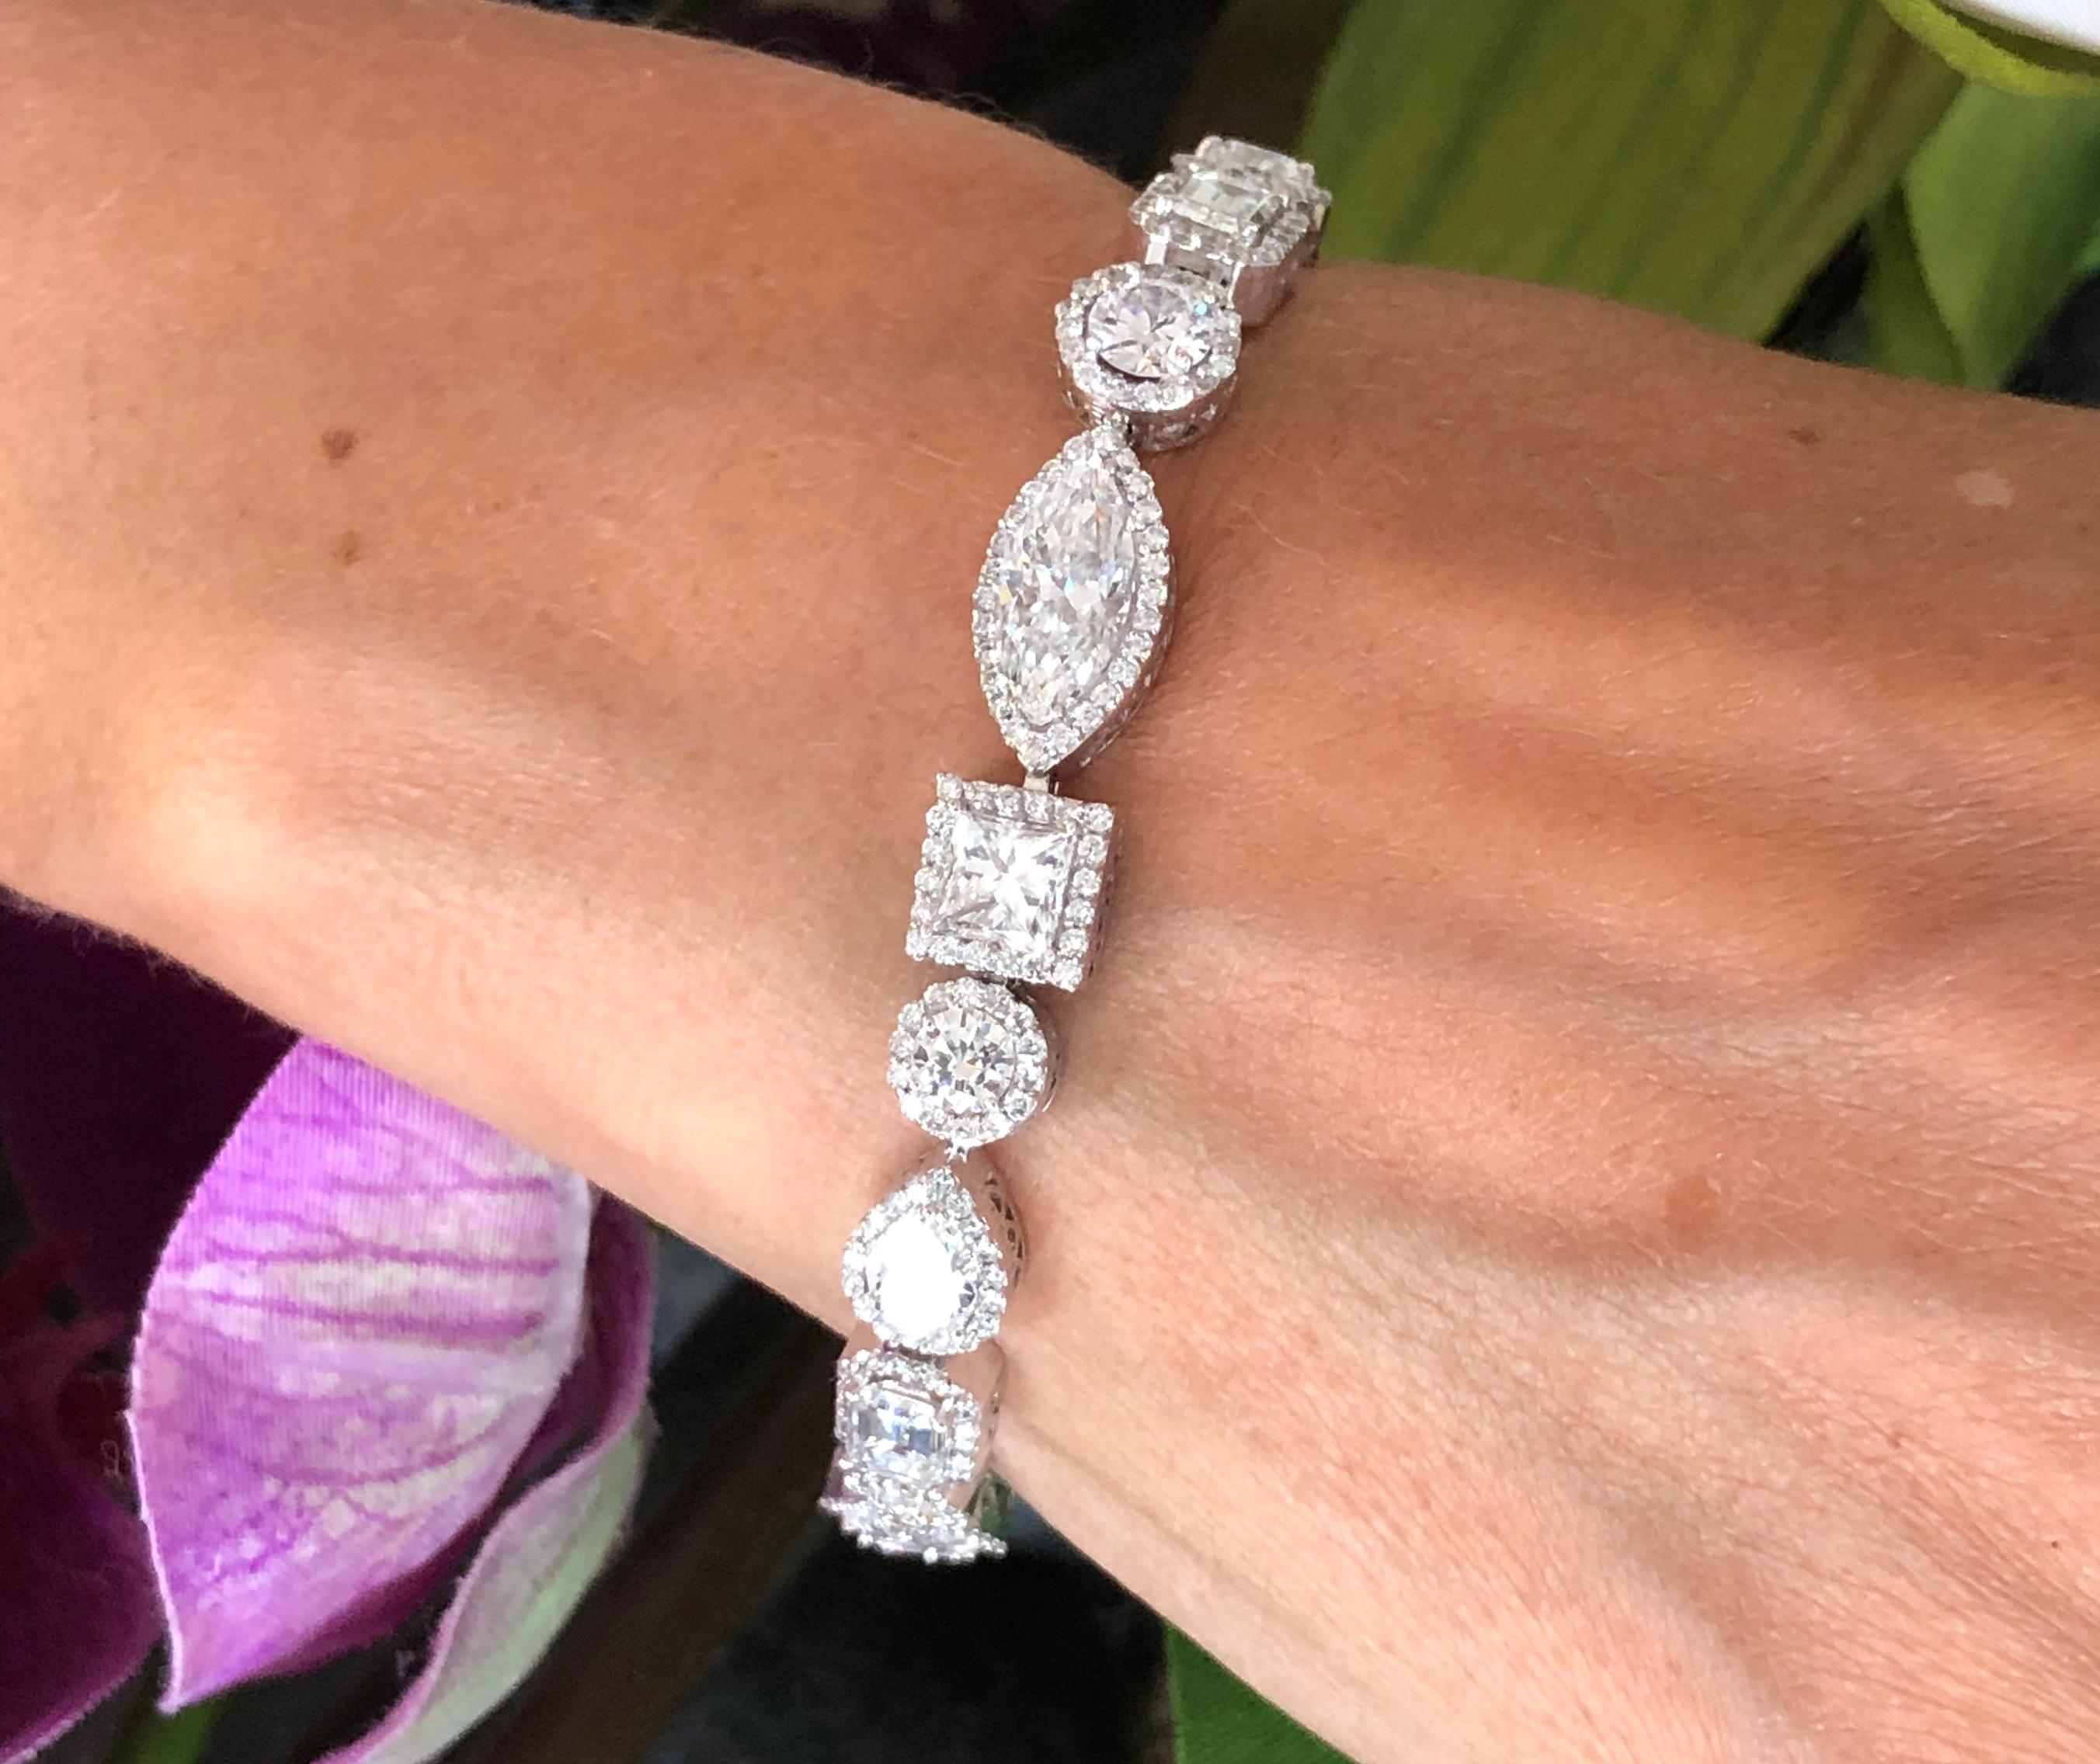 Offered here is a magnificent fancy shape diamond bracelet set in 18kt white gold. The bracelet measures about 7.5” long by a little over 0.25” width and weighs 24.40 grams. The bracelet is marked 18kt. The center diamond is a Marquise cut with a